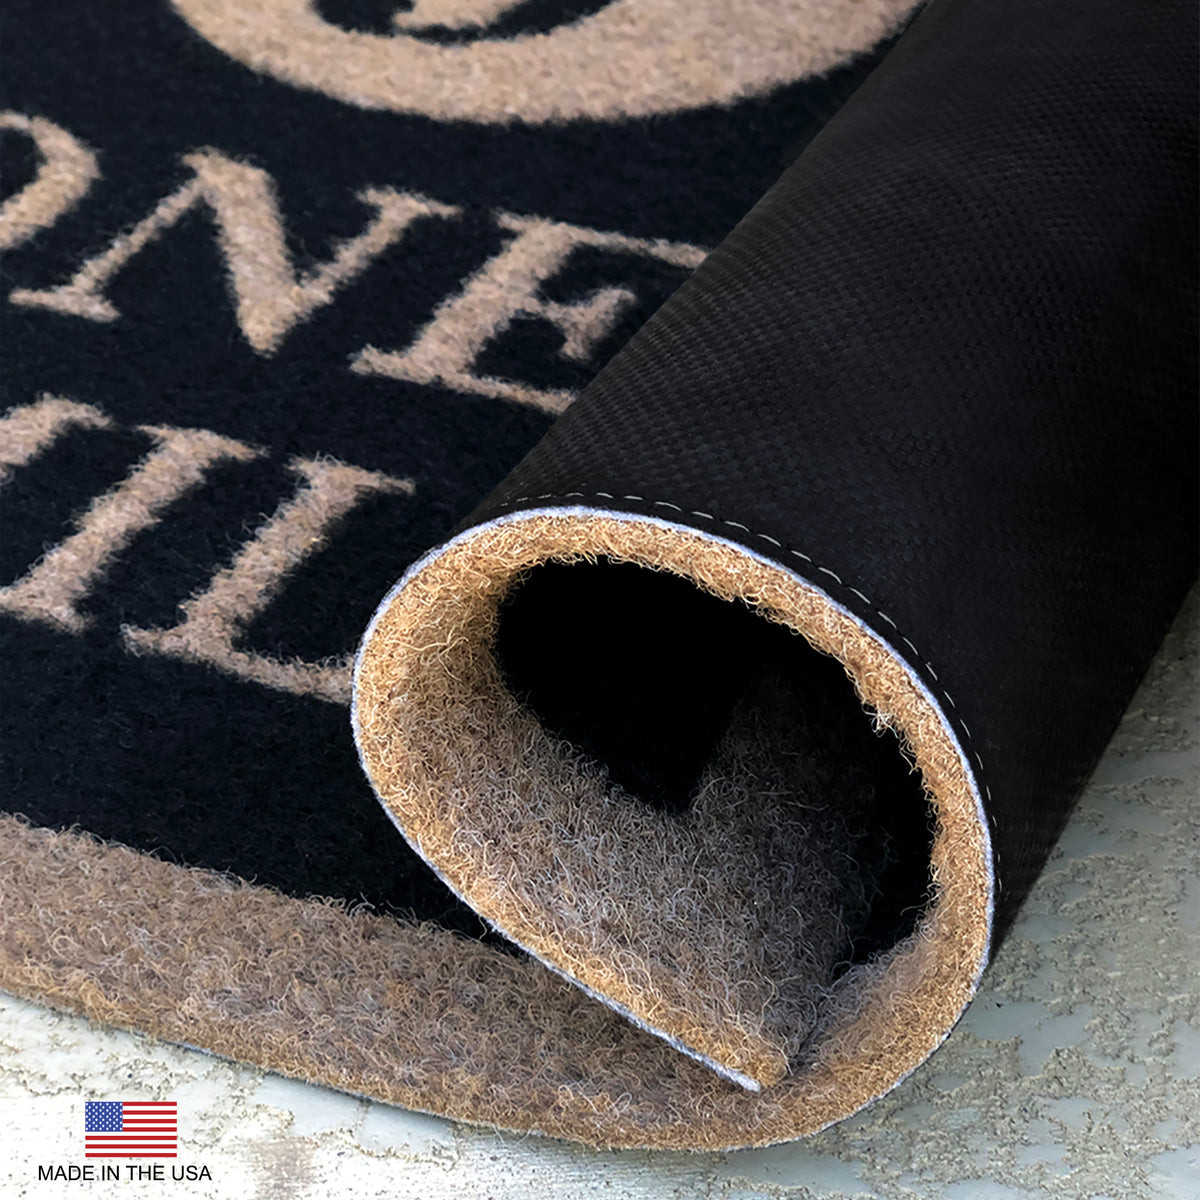 Infinity Custom Mats™ All-Weather Personalized Door Mat - STYLE: ANDERSON COLOR: BLACK - rugsthatfit.com